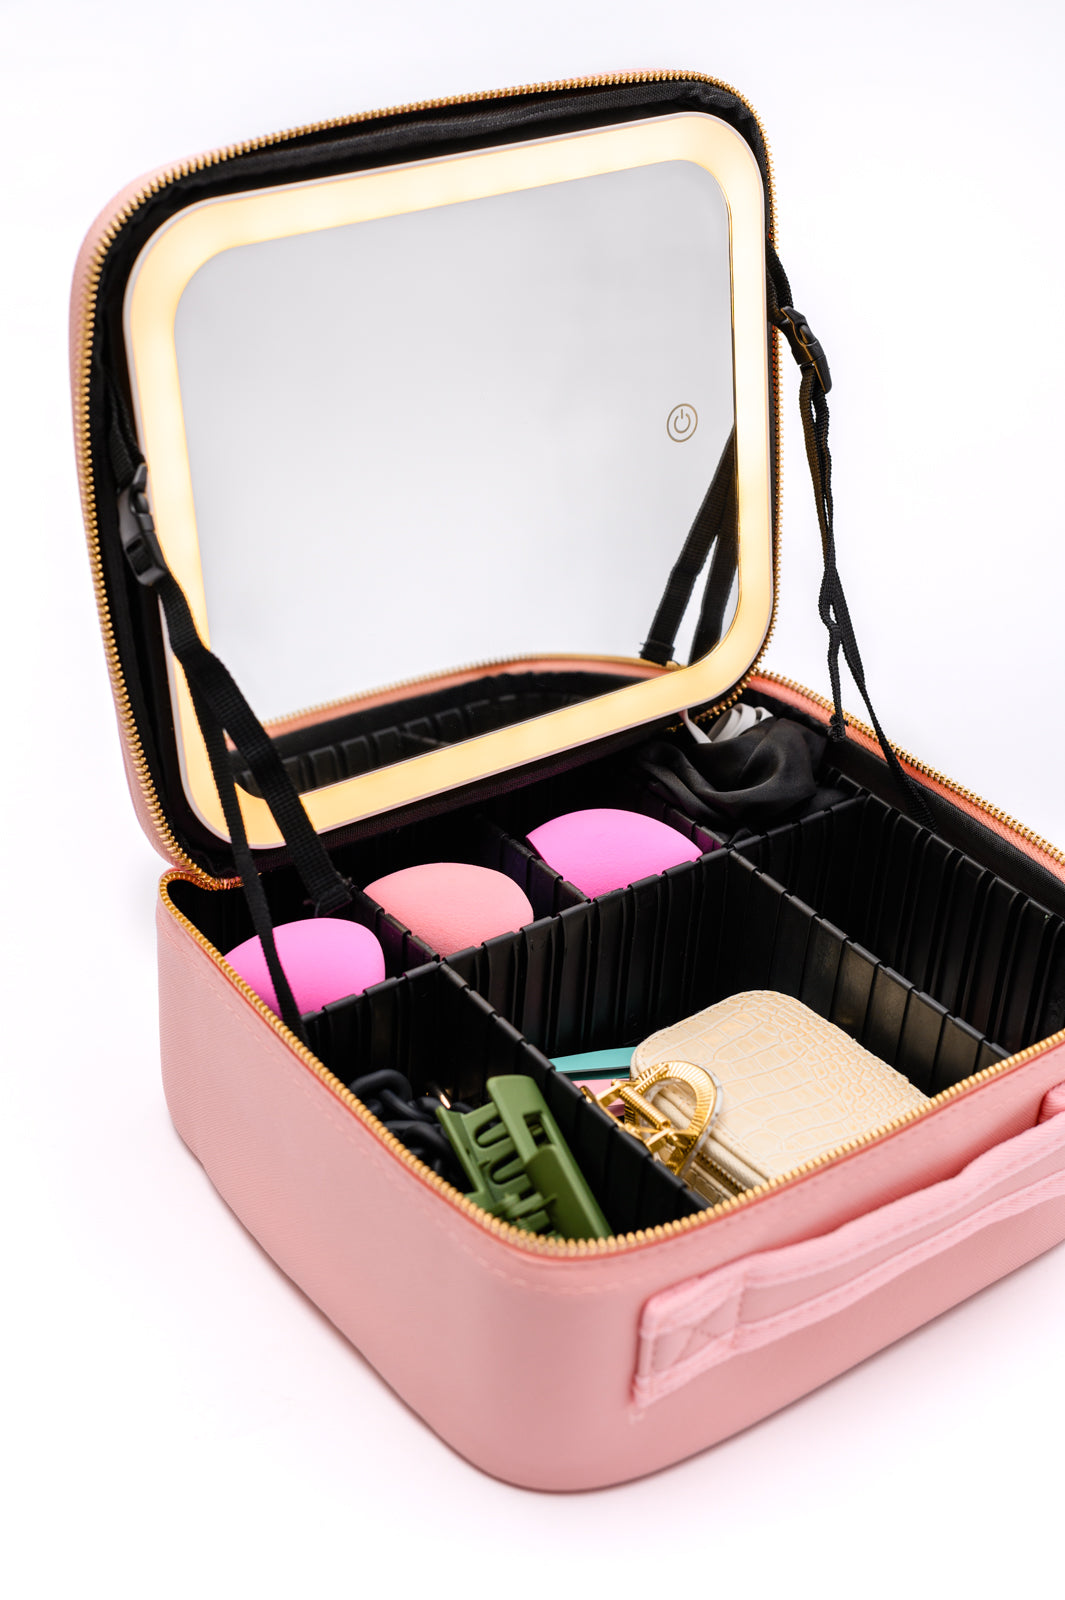 She's All That LED Makeup Case in Pink - Southern Soul Collectives